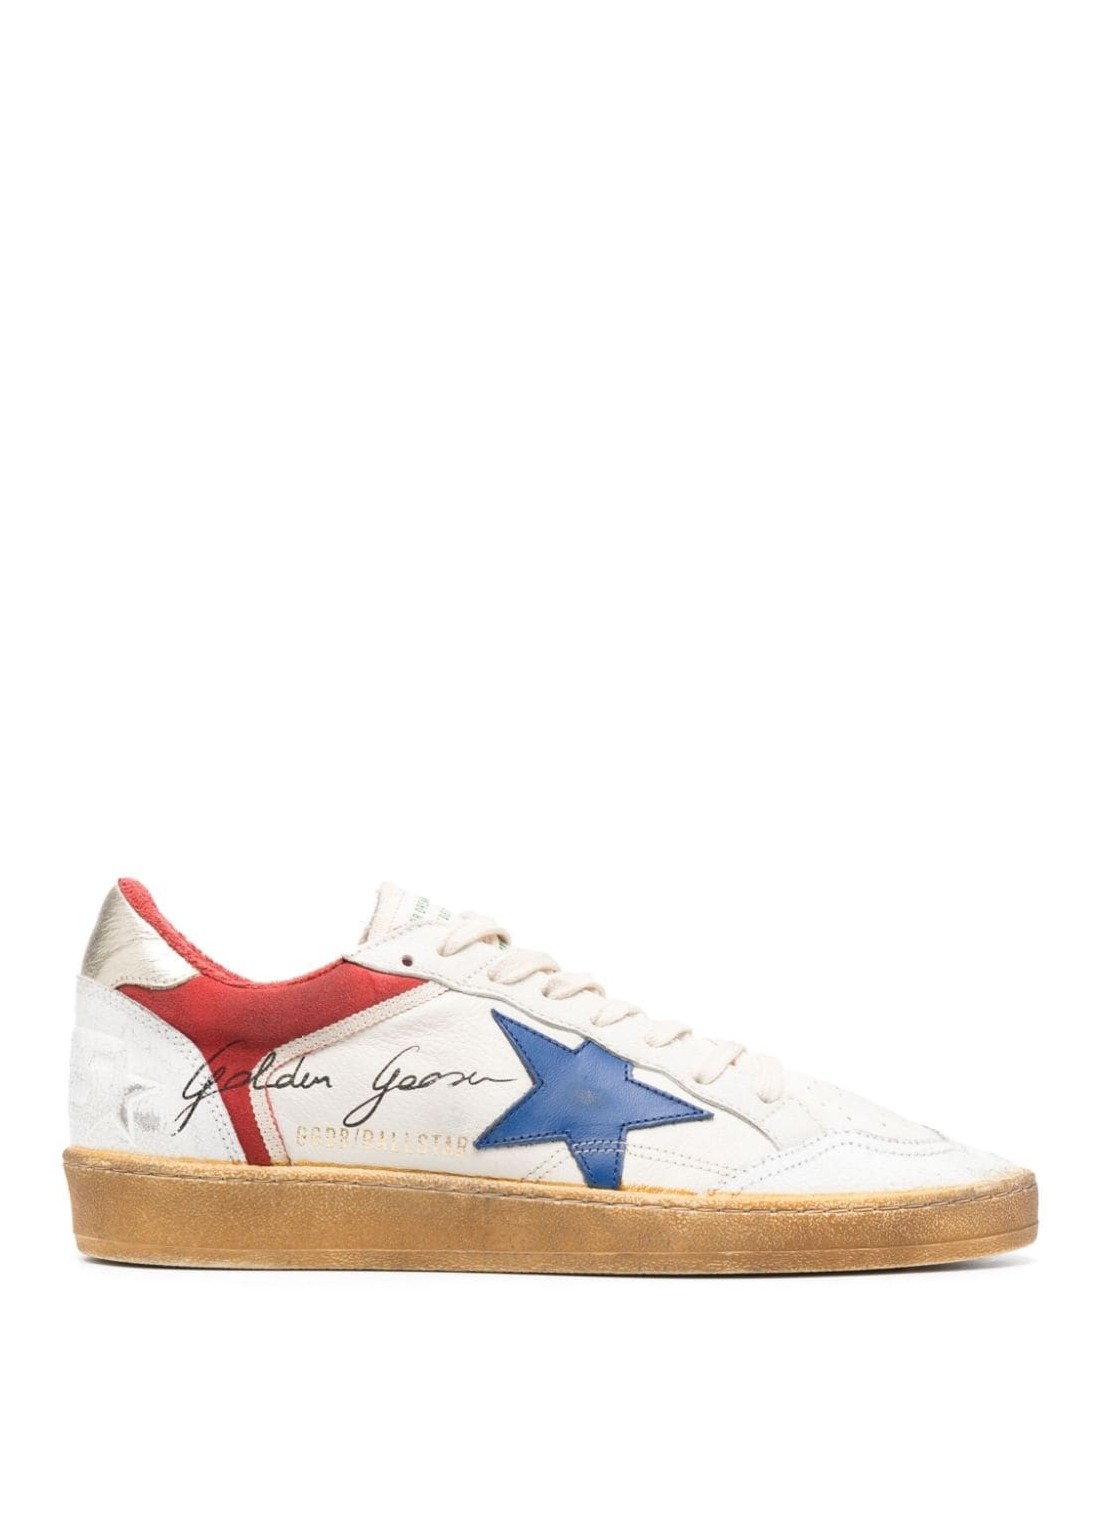 Sneaker golden goose ballstar nappa and sponge upper with trims and signature cr - gmf00327f004747 1